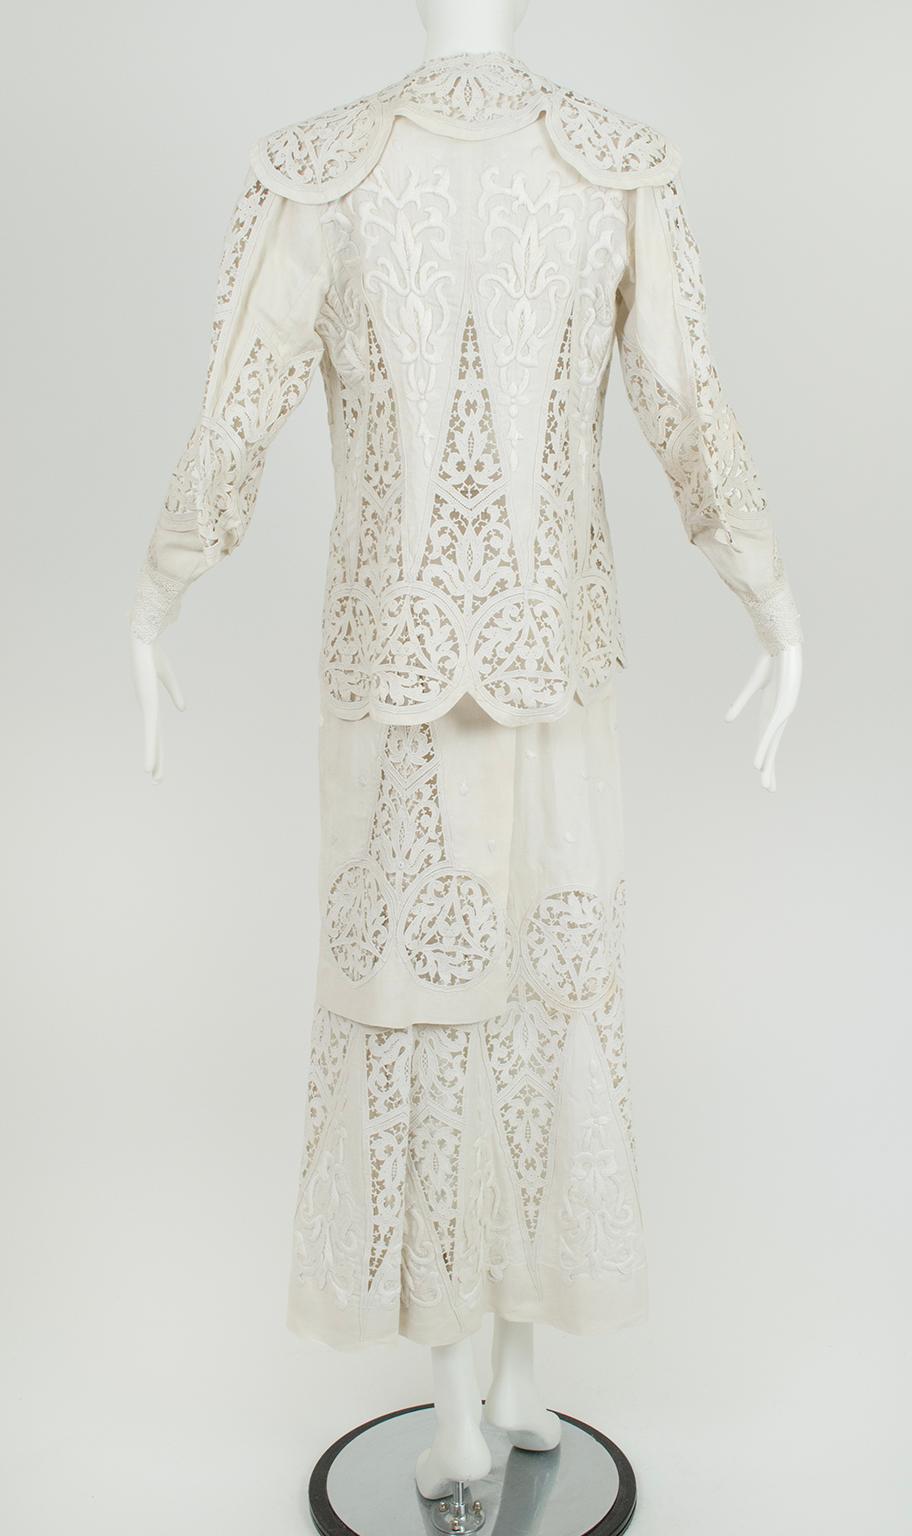 Women's Edwardian White Irish Crochet and Cotton Walking or Wedding Suit – L, 1900s For Sale